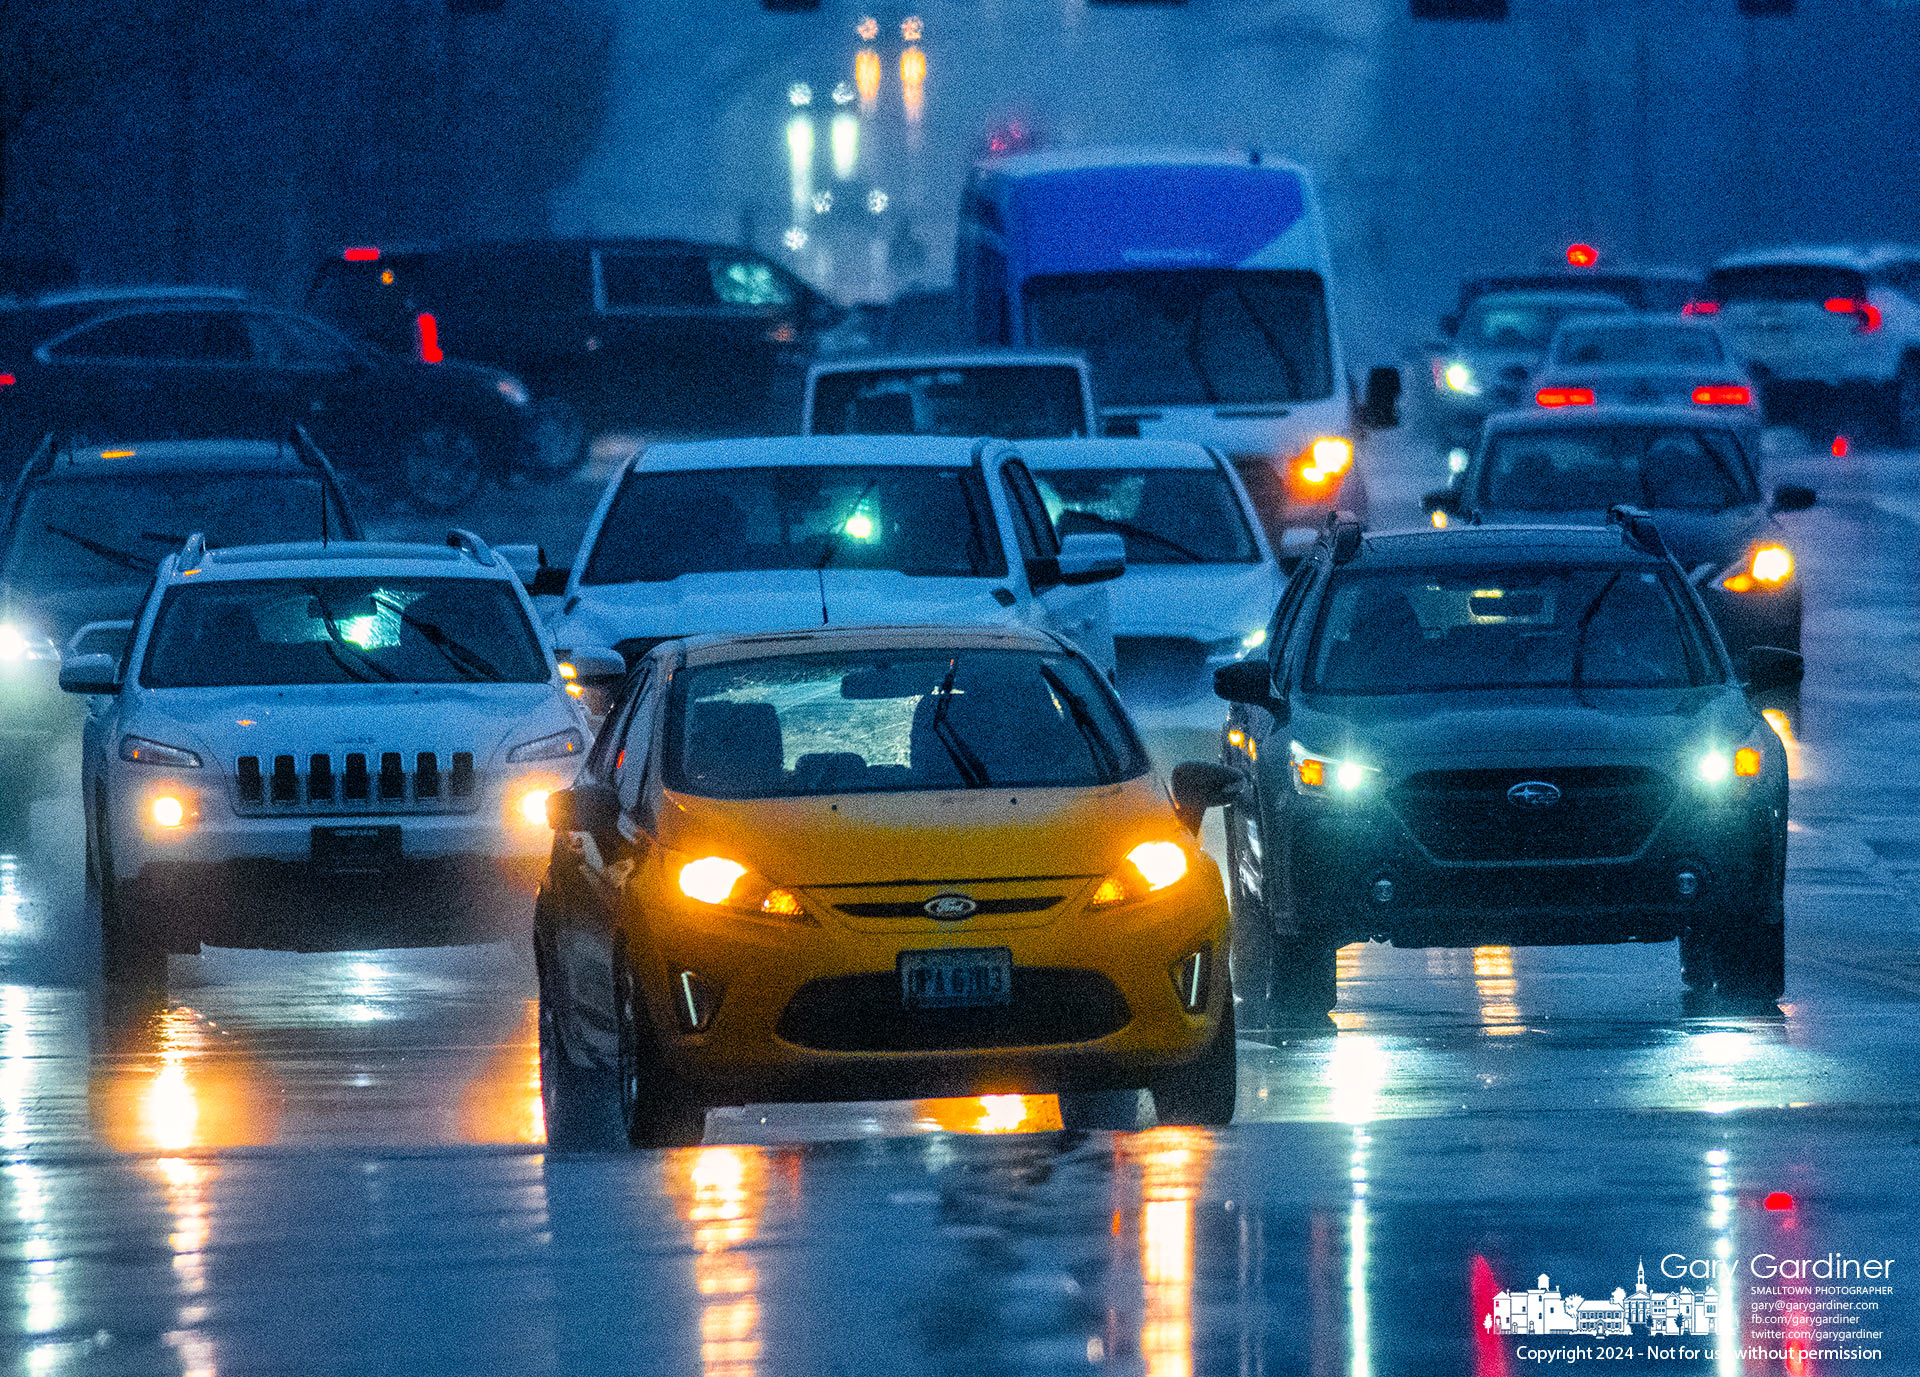 A caravan of vehicles crosses Otterbein Avenue as they travel east on Schrock Road in a rainstorm about 15 minutes after sunset Thursday. My Final Photo for February 22, 2024.